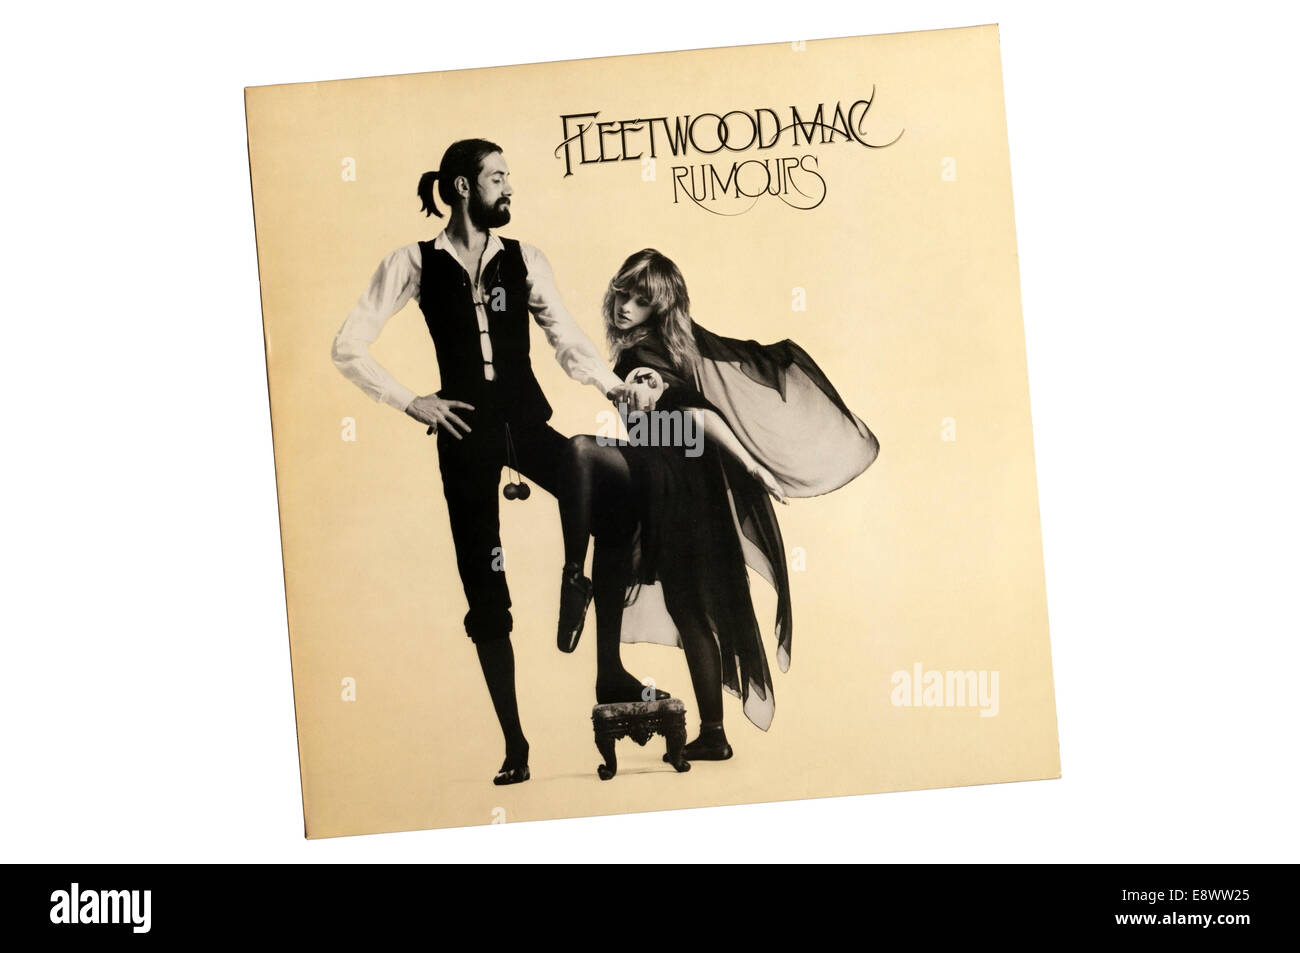 Rumours was the 11th studio album by British-American rock band Fleetwood Mac, released in 1977. Stock Photo